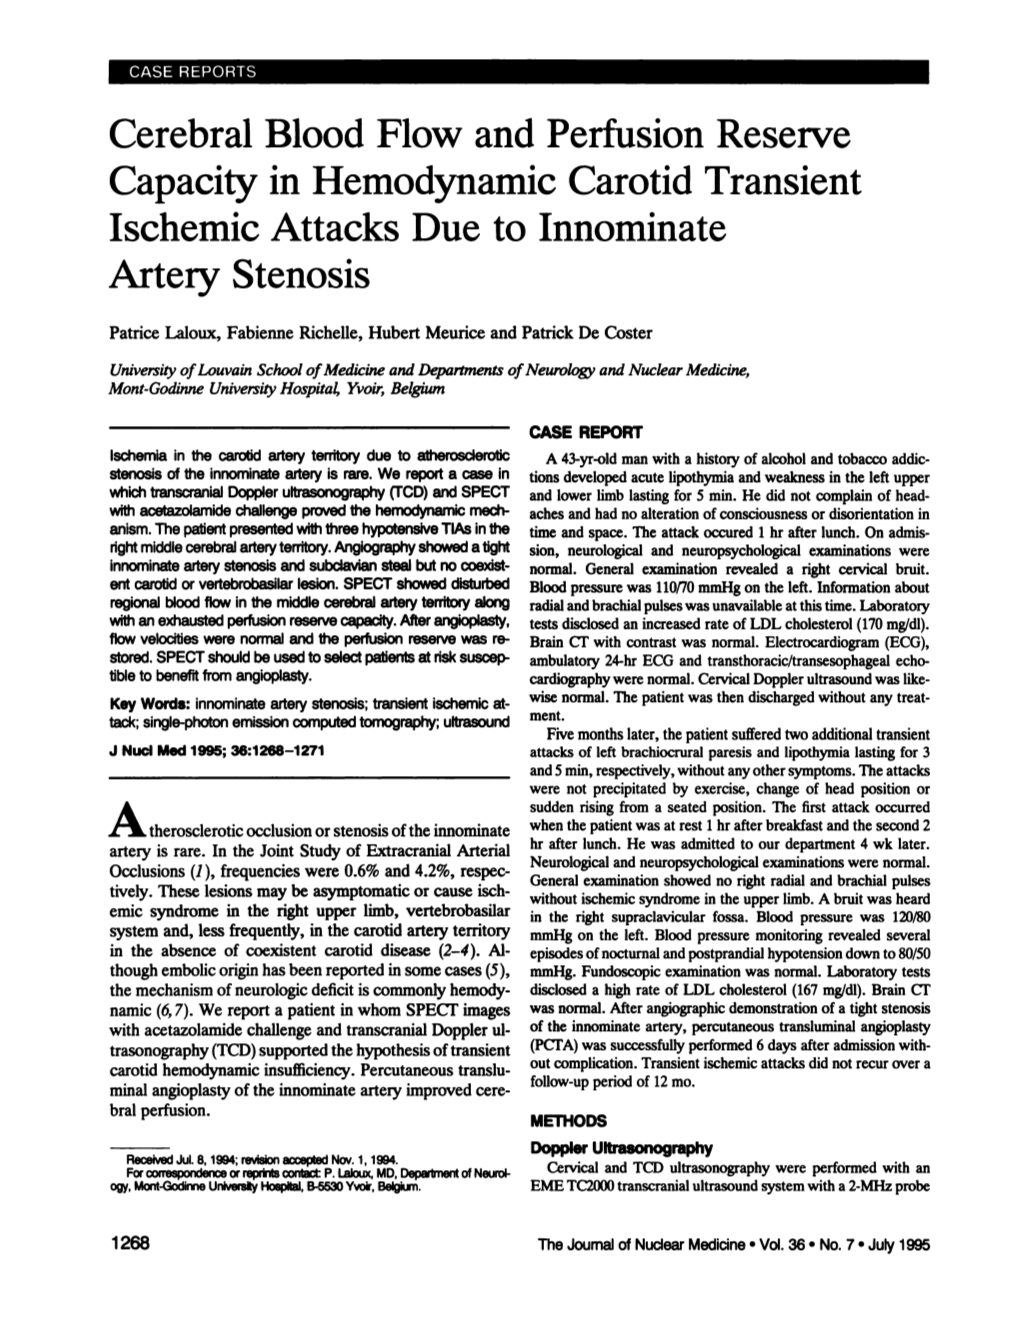 Cerebral Blood Flow and Perfusion Reserve Capacity in Hemodynamic Carotid Transient Ischemic Attacks Due to Innominate Artery Stenosis